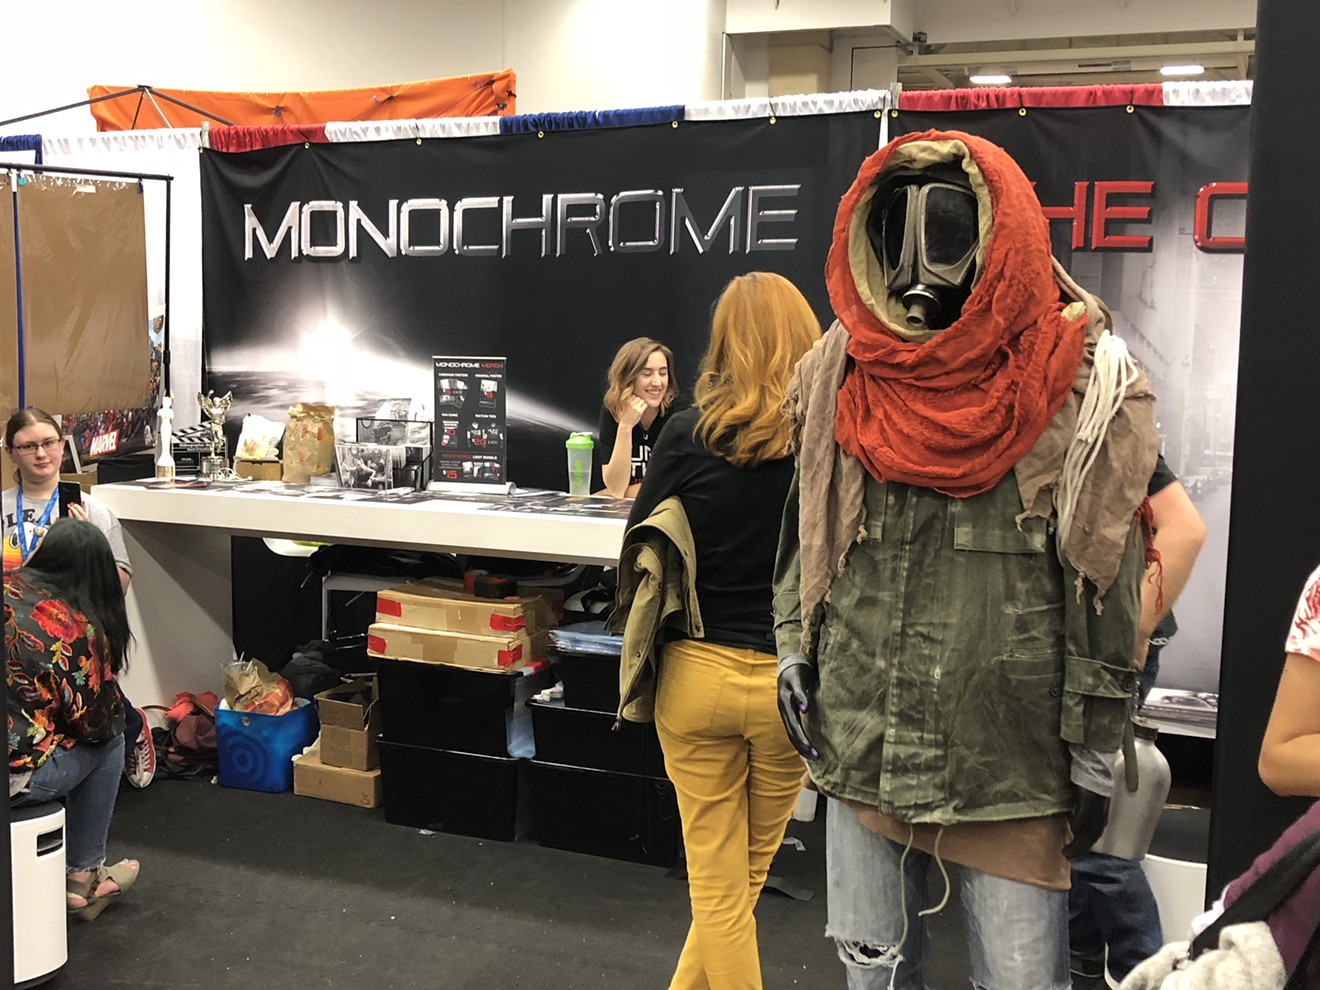 Monochrome: The Chromism advertises at Dallas Fan Expo.